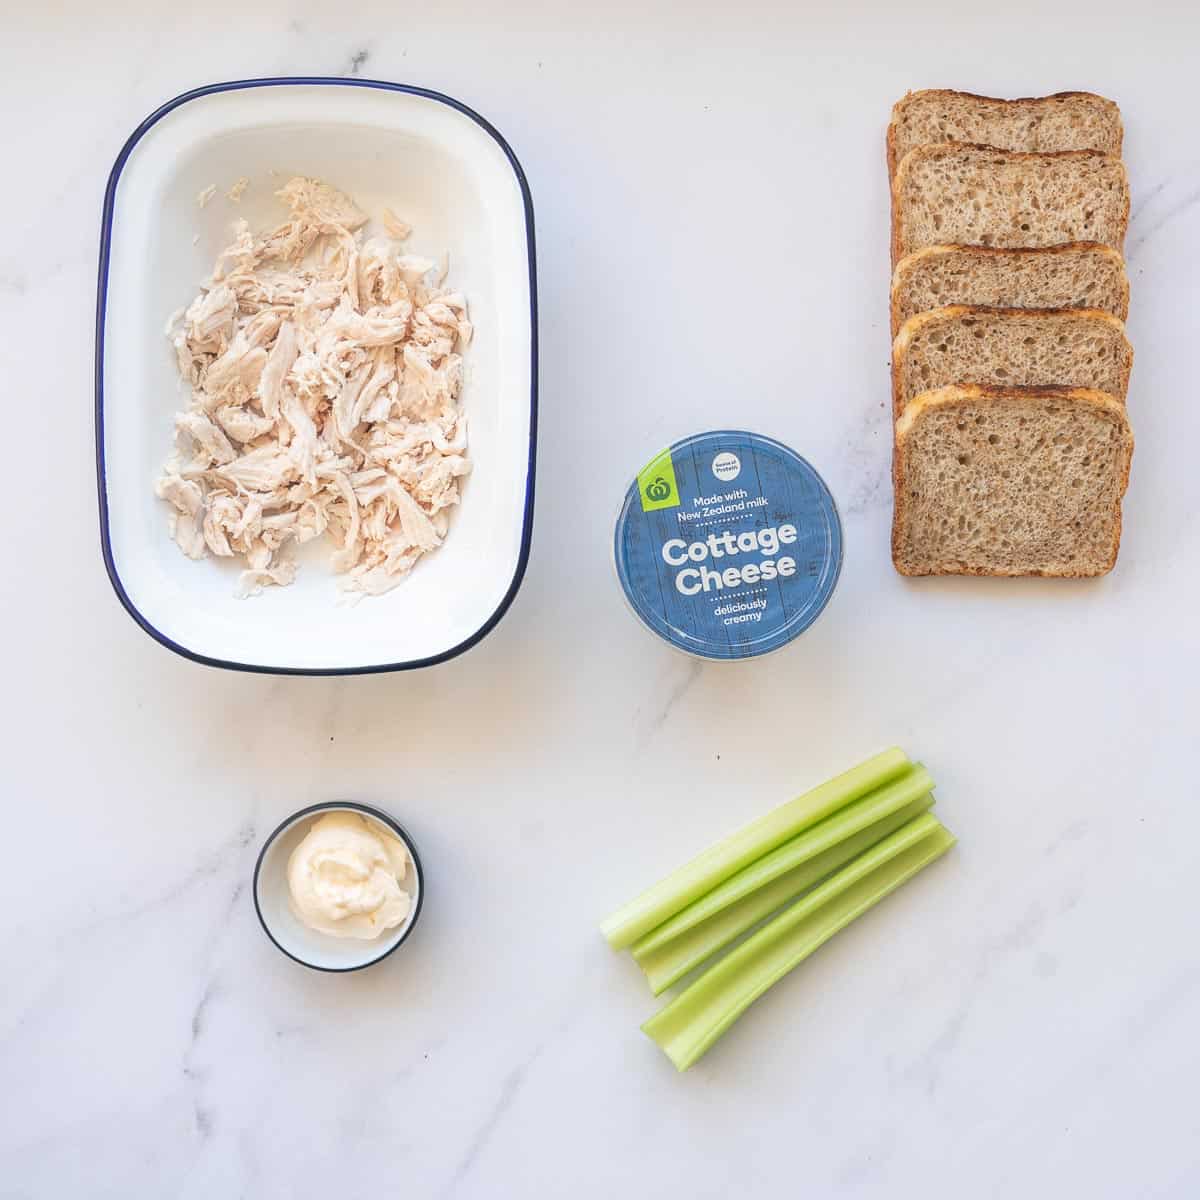 A dish of shredded chicken, small bowl of mayonnaise, celery sticks cottage cheese and slices of bread laid out on a bench top.